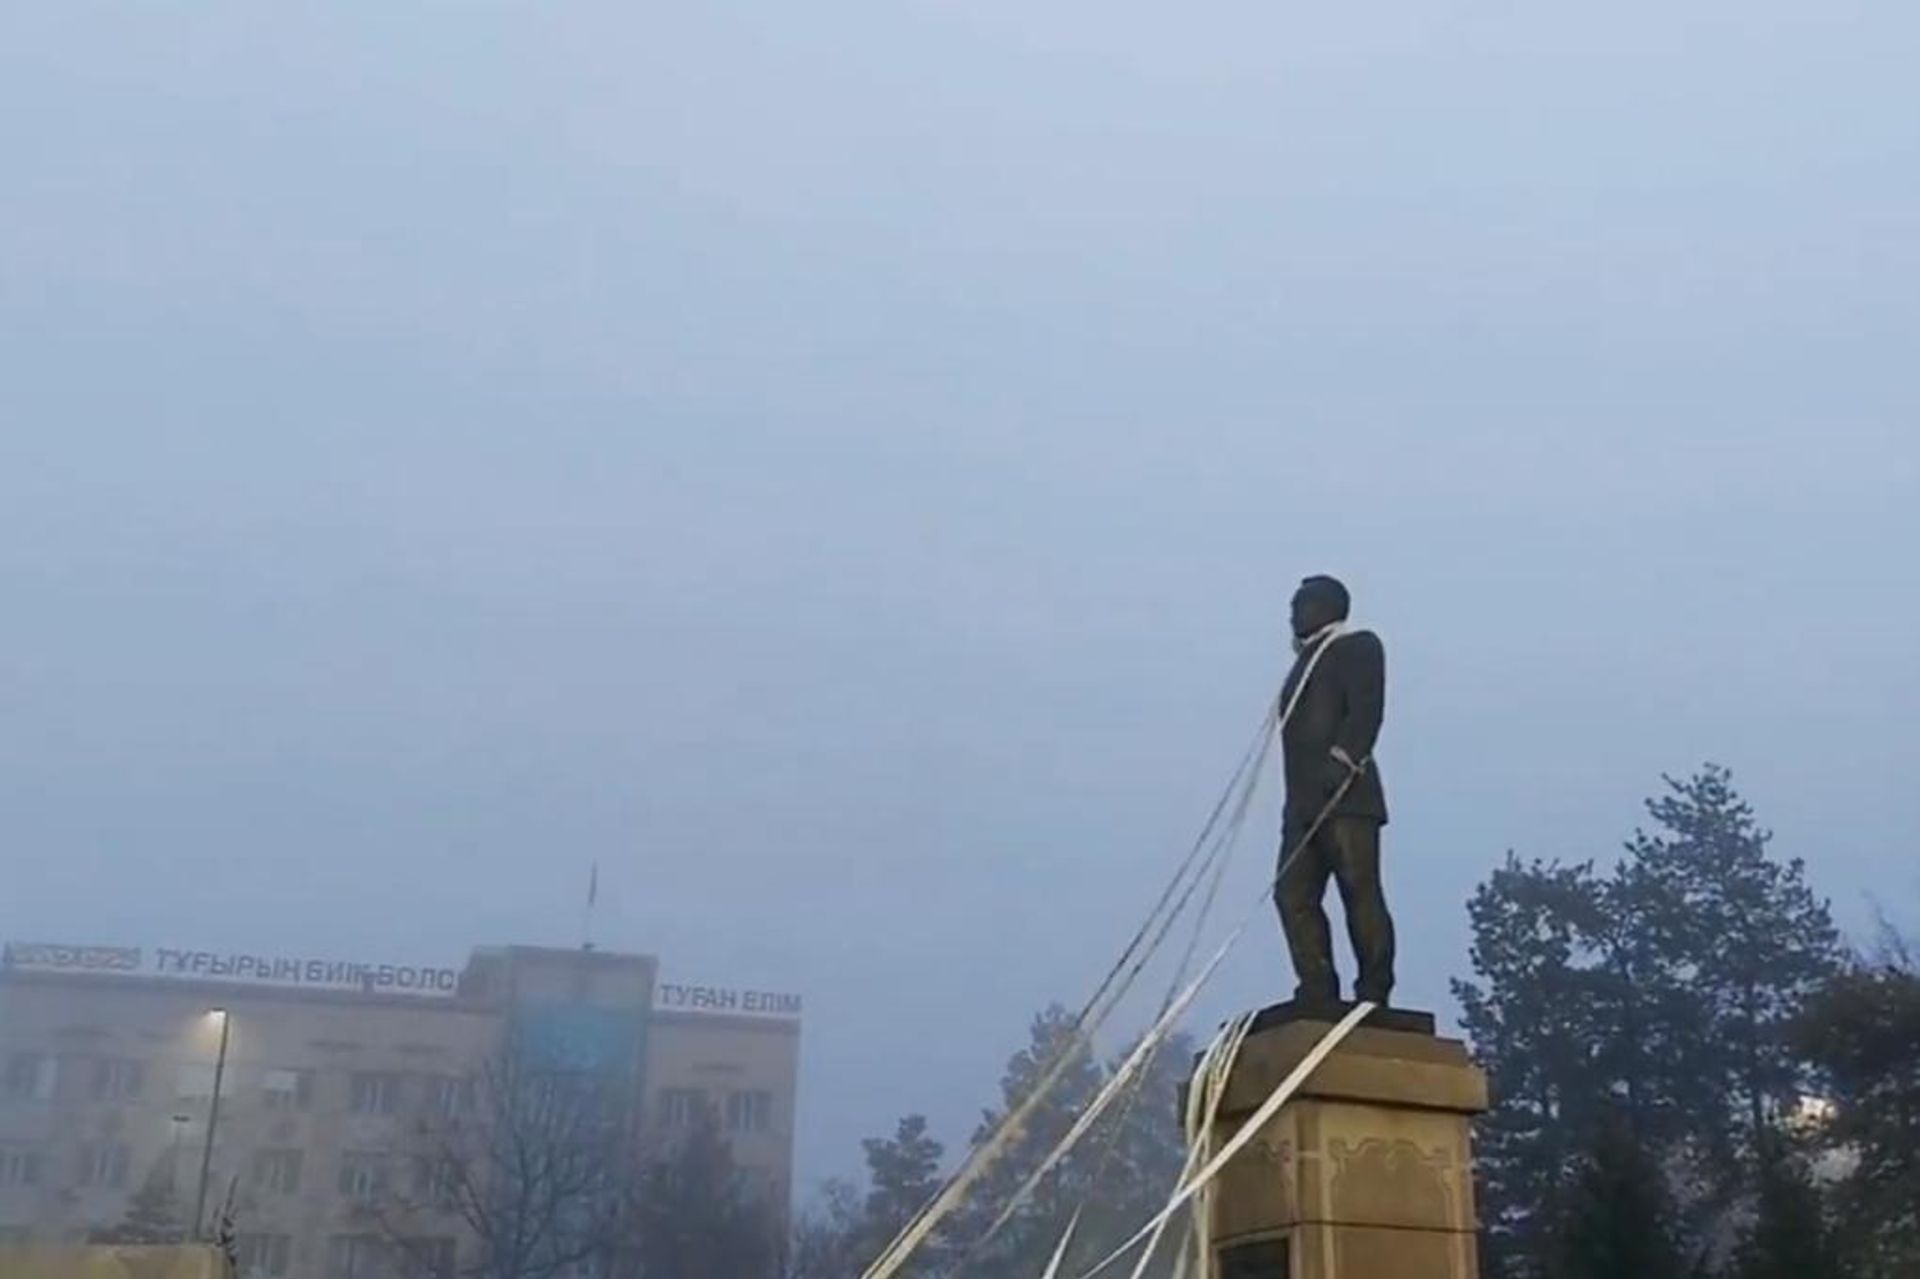 The monument to Nursultan Nazarbayev, the Kazakhstan first president was brought down by protestors Image: Liveumap/Twitter